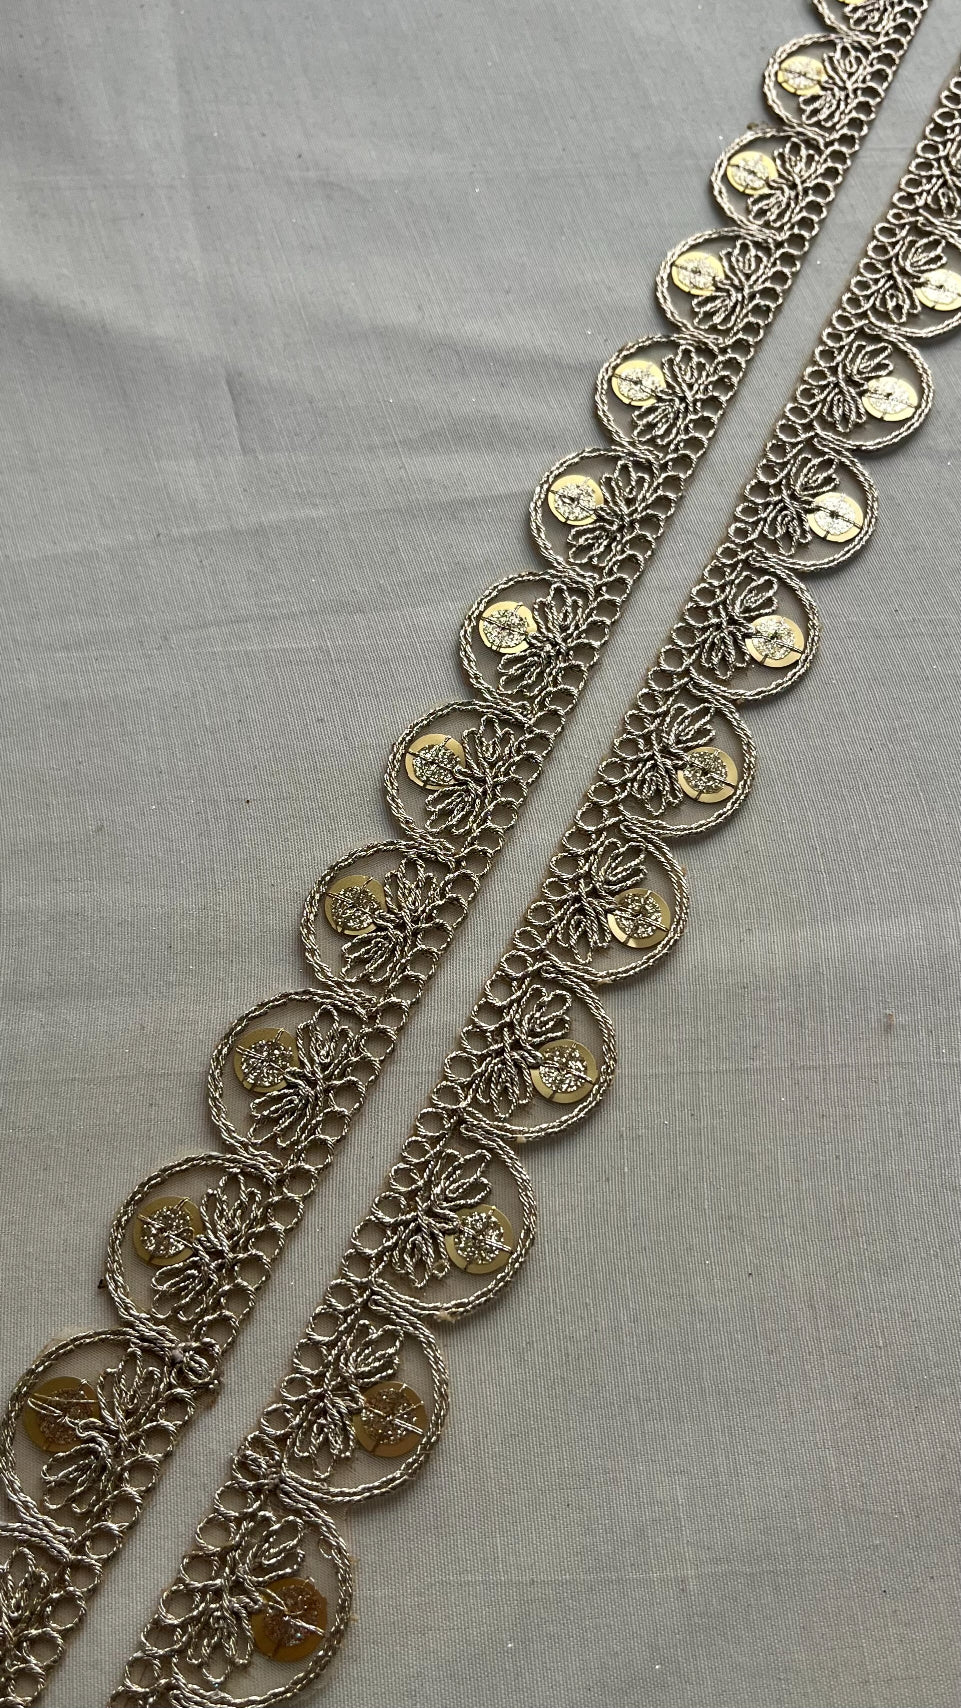 Gold Zari With Sequins Embroidered Scallop Lace (9 Meters)